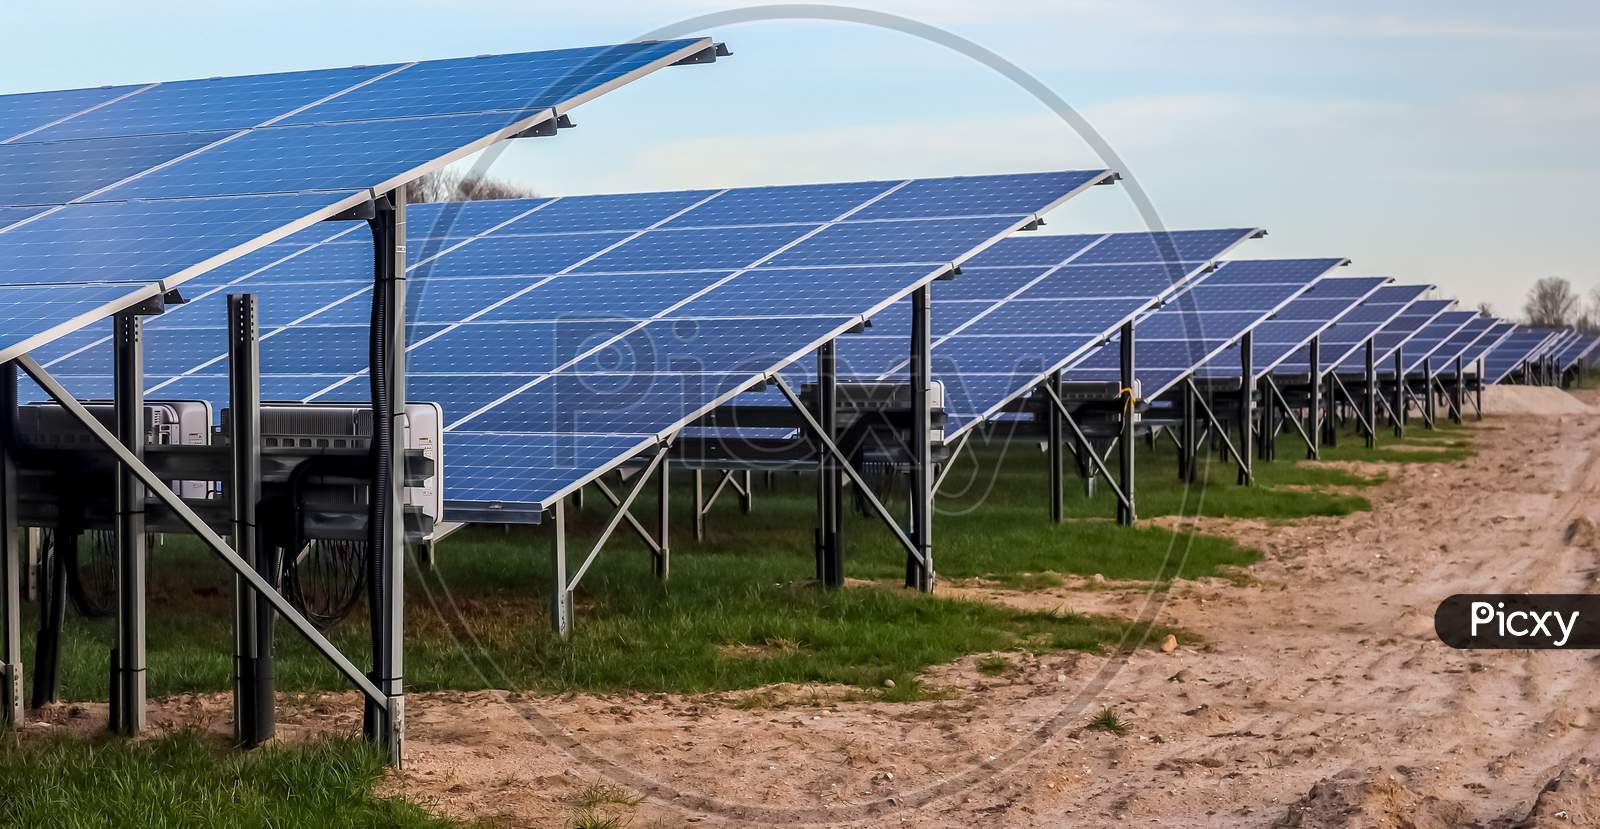 Generating Clean Energy With Solar Modules In A Big Park In Northern Europe